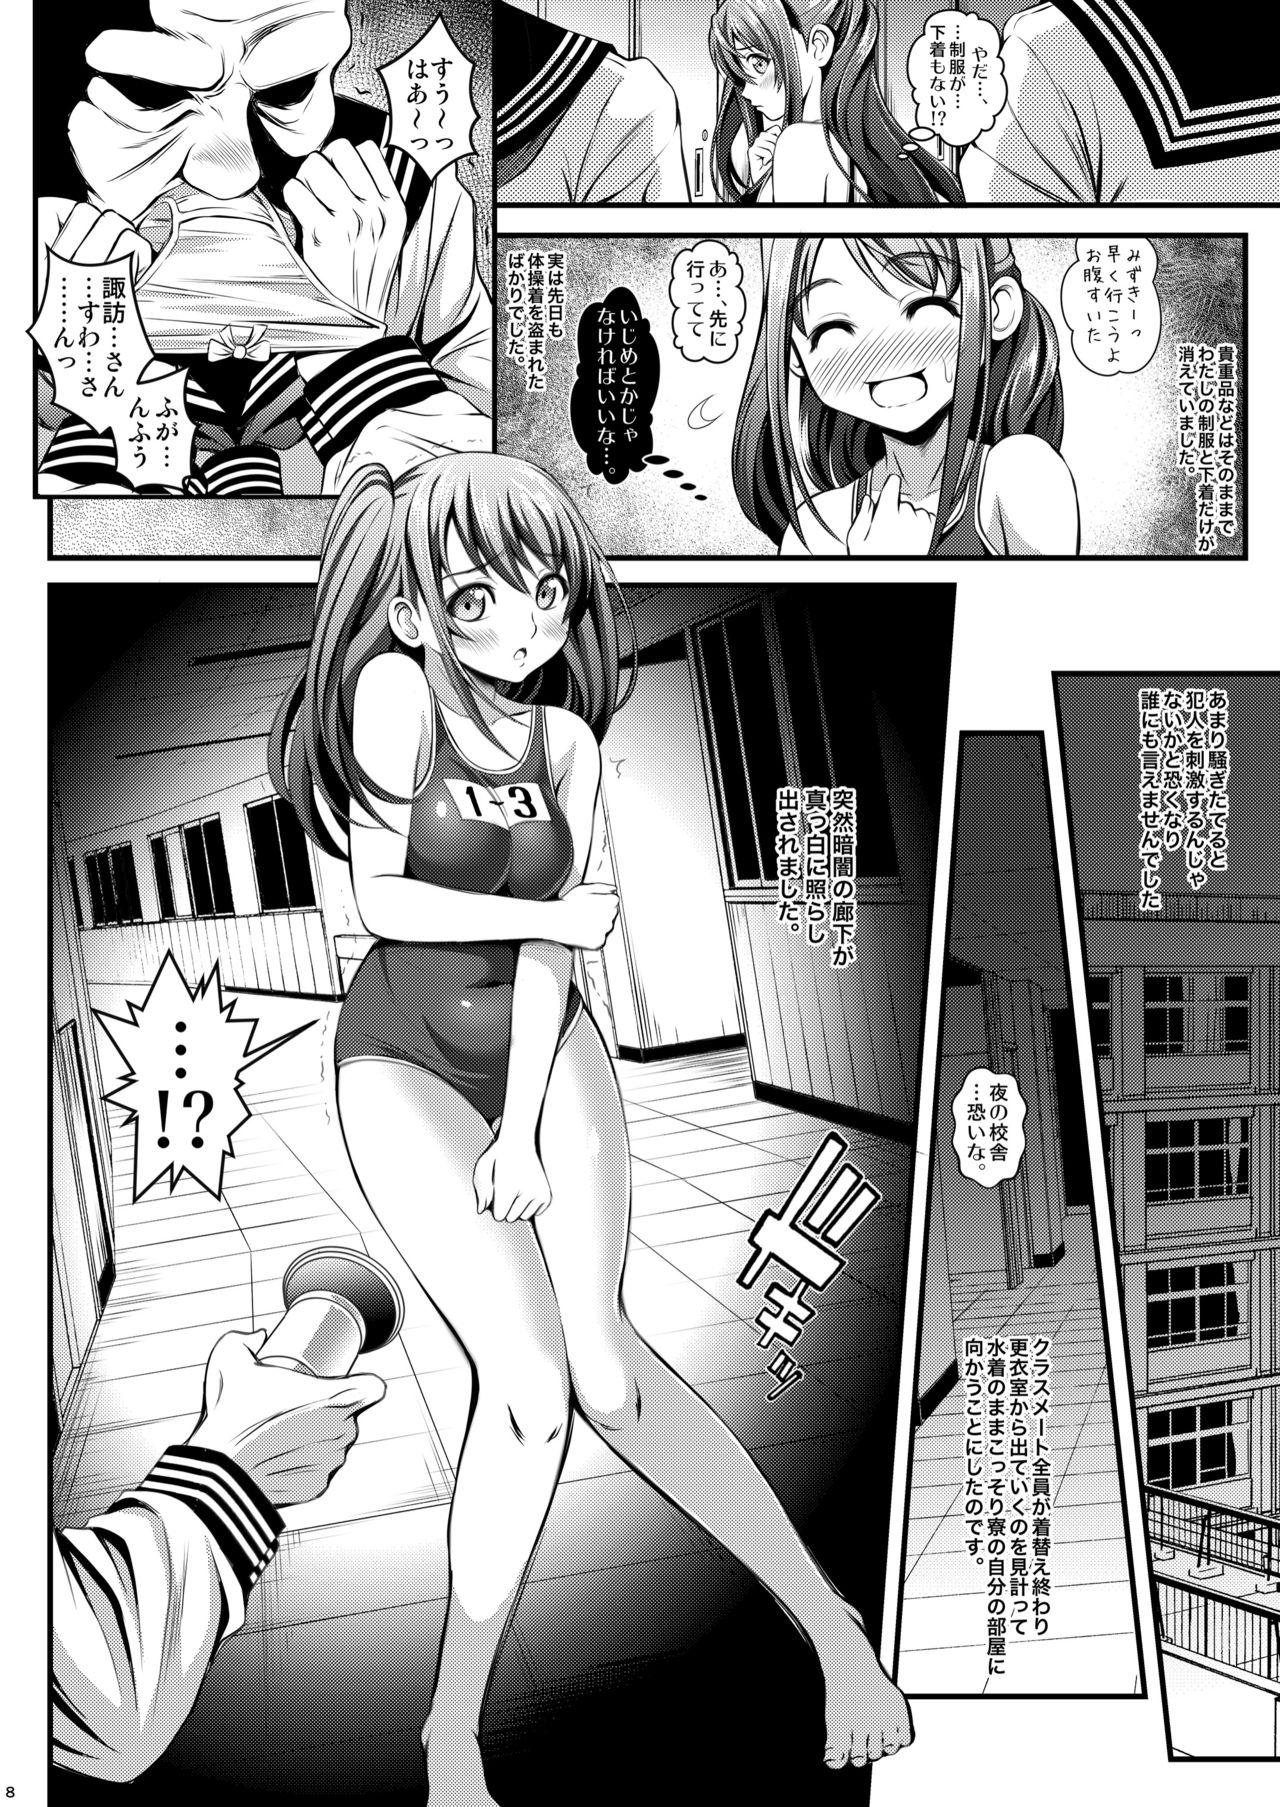 Famosa Youmuin no Ossan - Original Freckles - Page 8